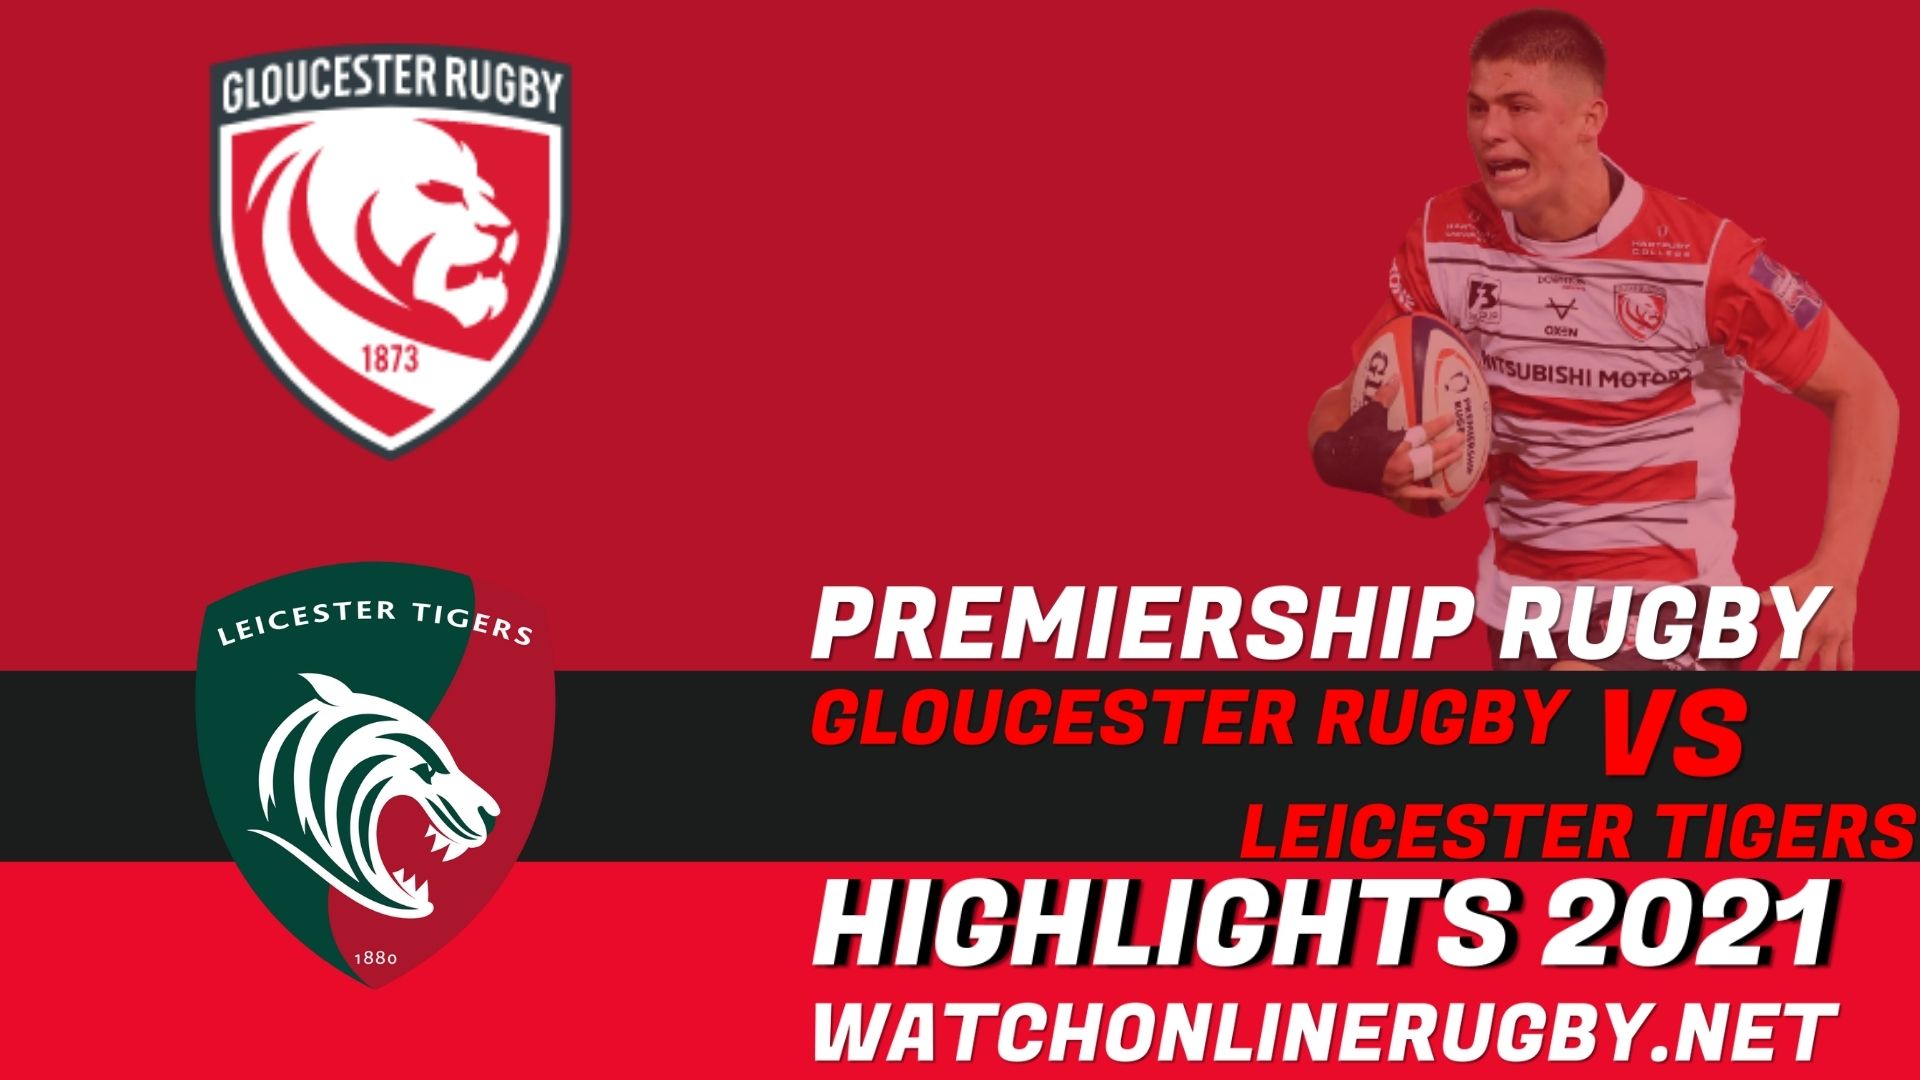 Gloucester Rugby Vs Leicester Tigers Premiership Rugby 2021 RD 2